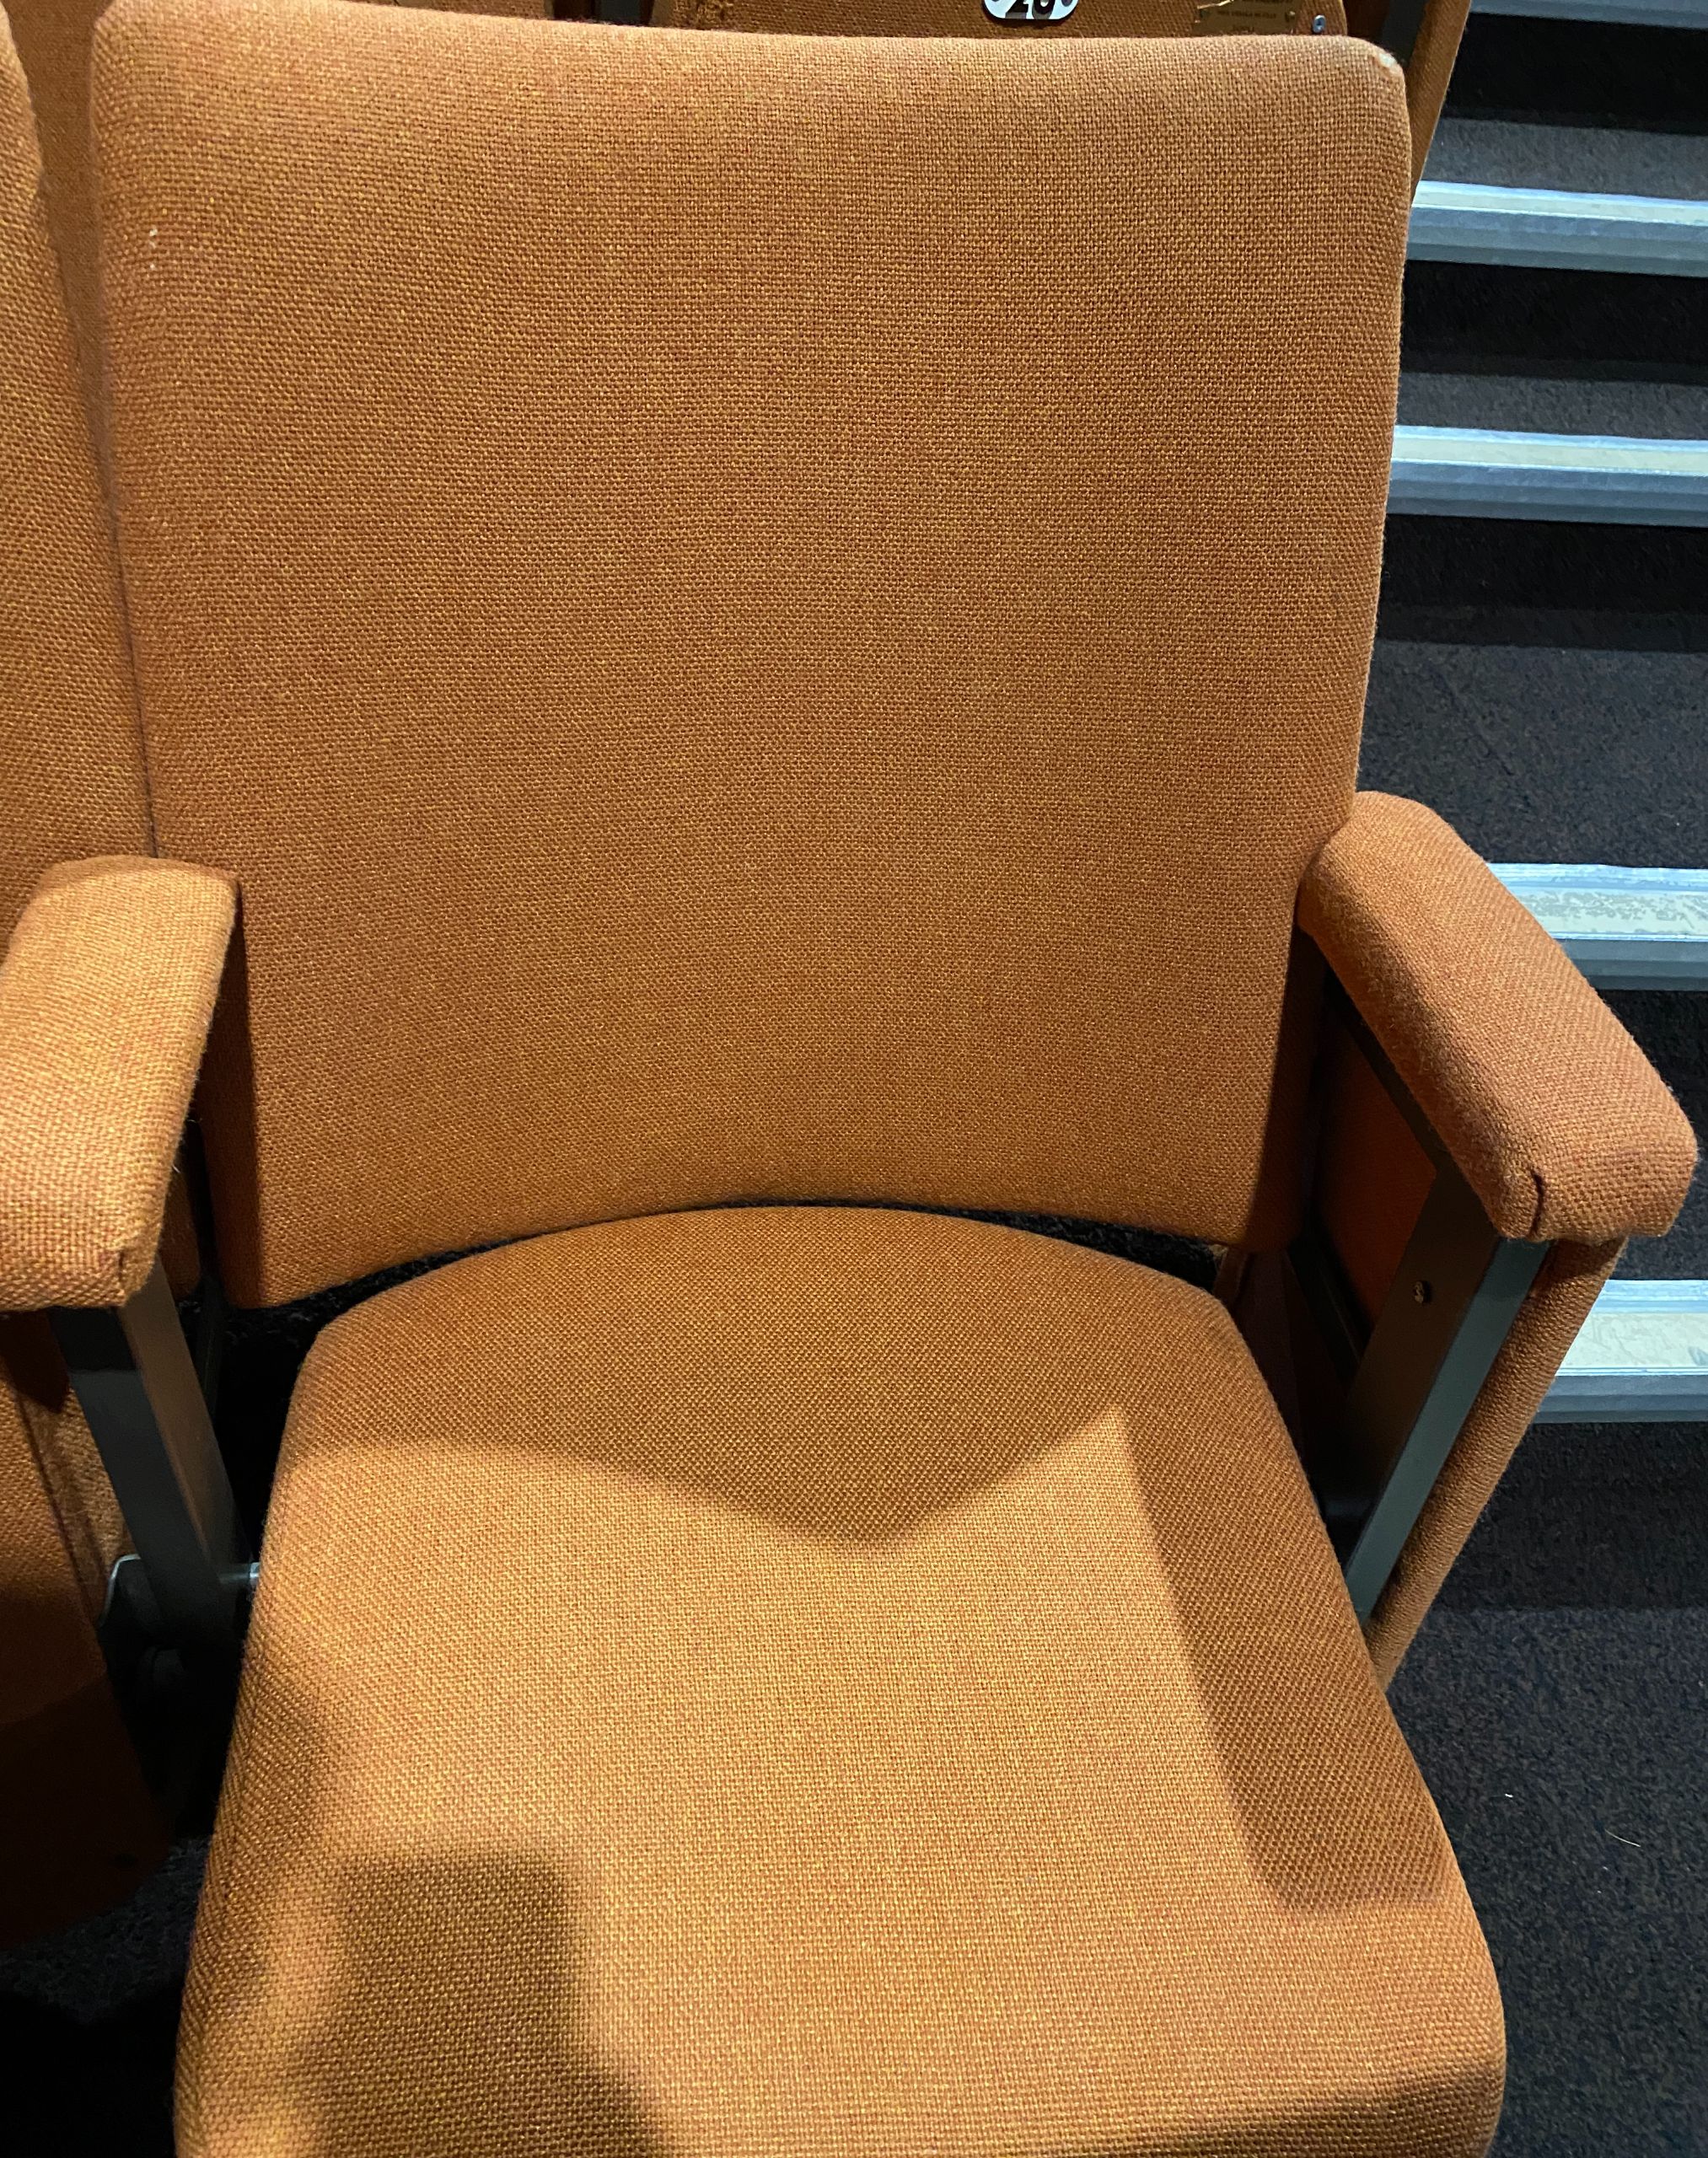 An image of a light orange folding theatre chair with arm rests.